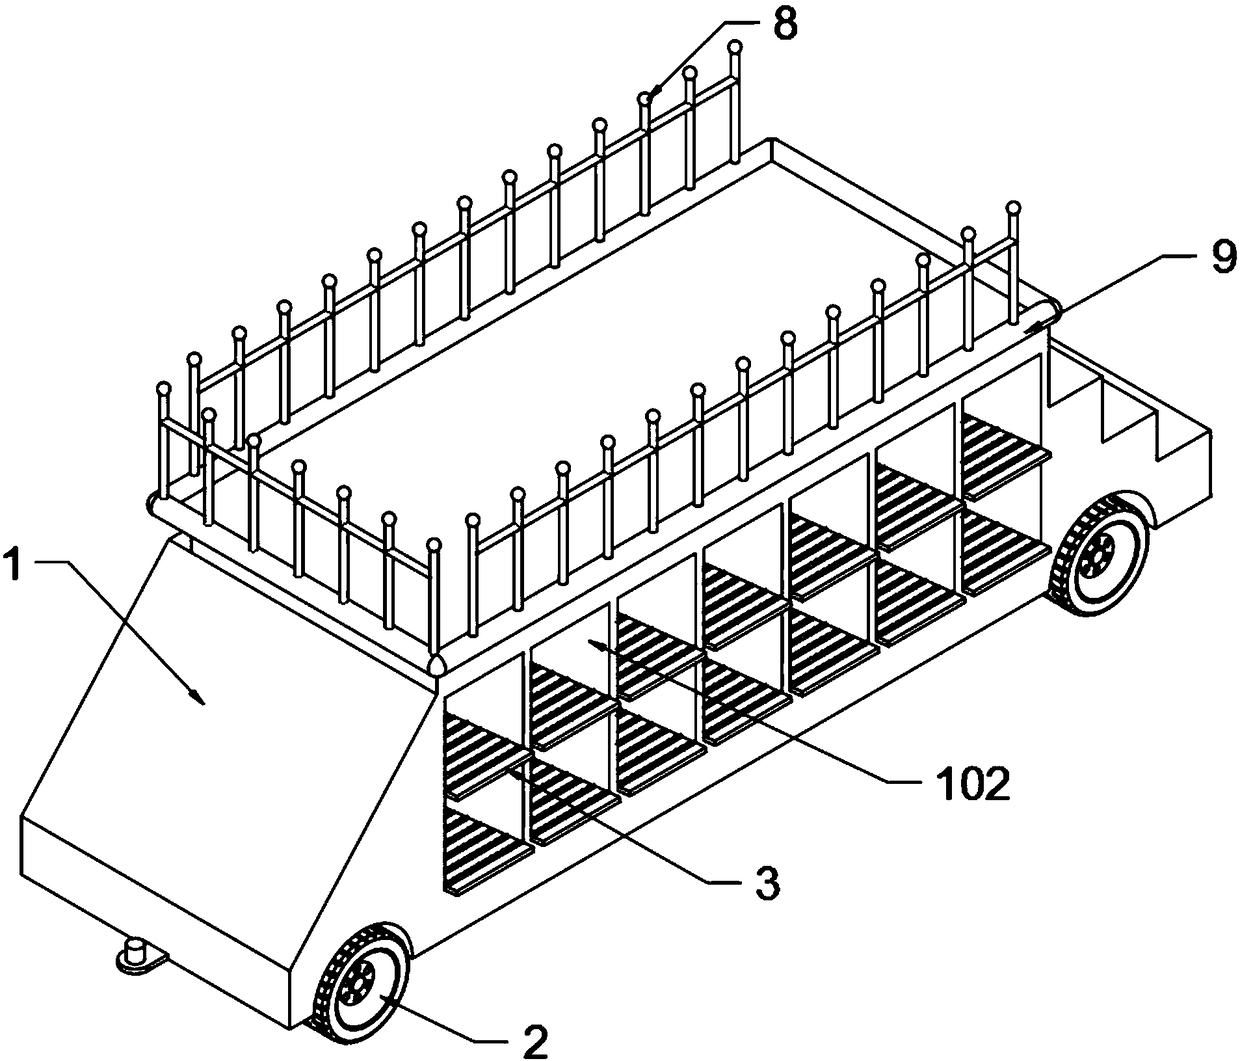 Mobile luggage carrying device for air transportation